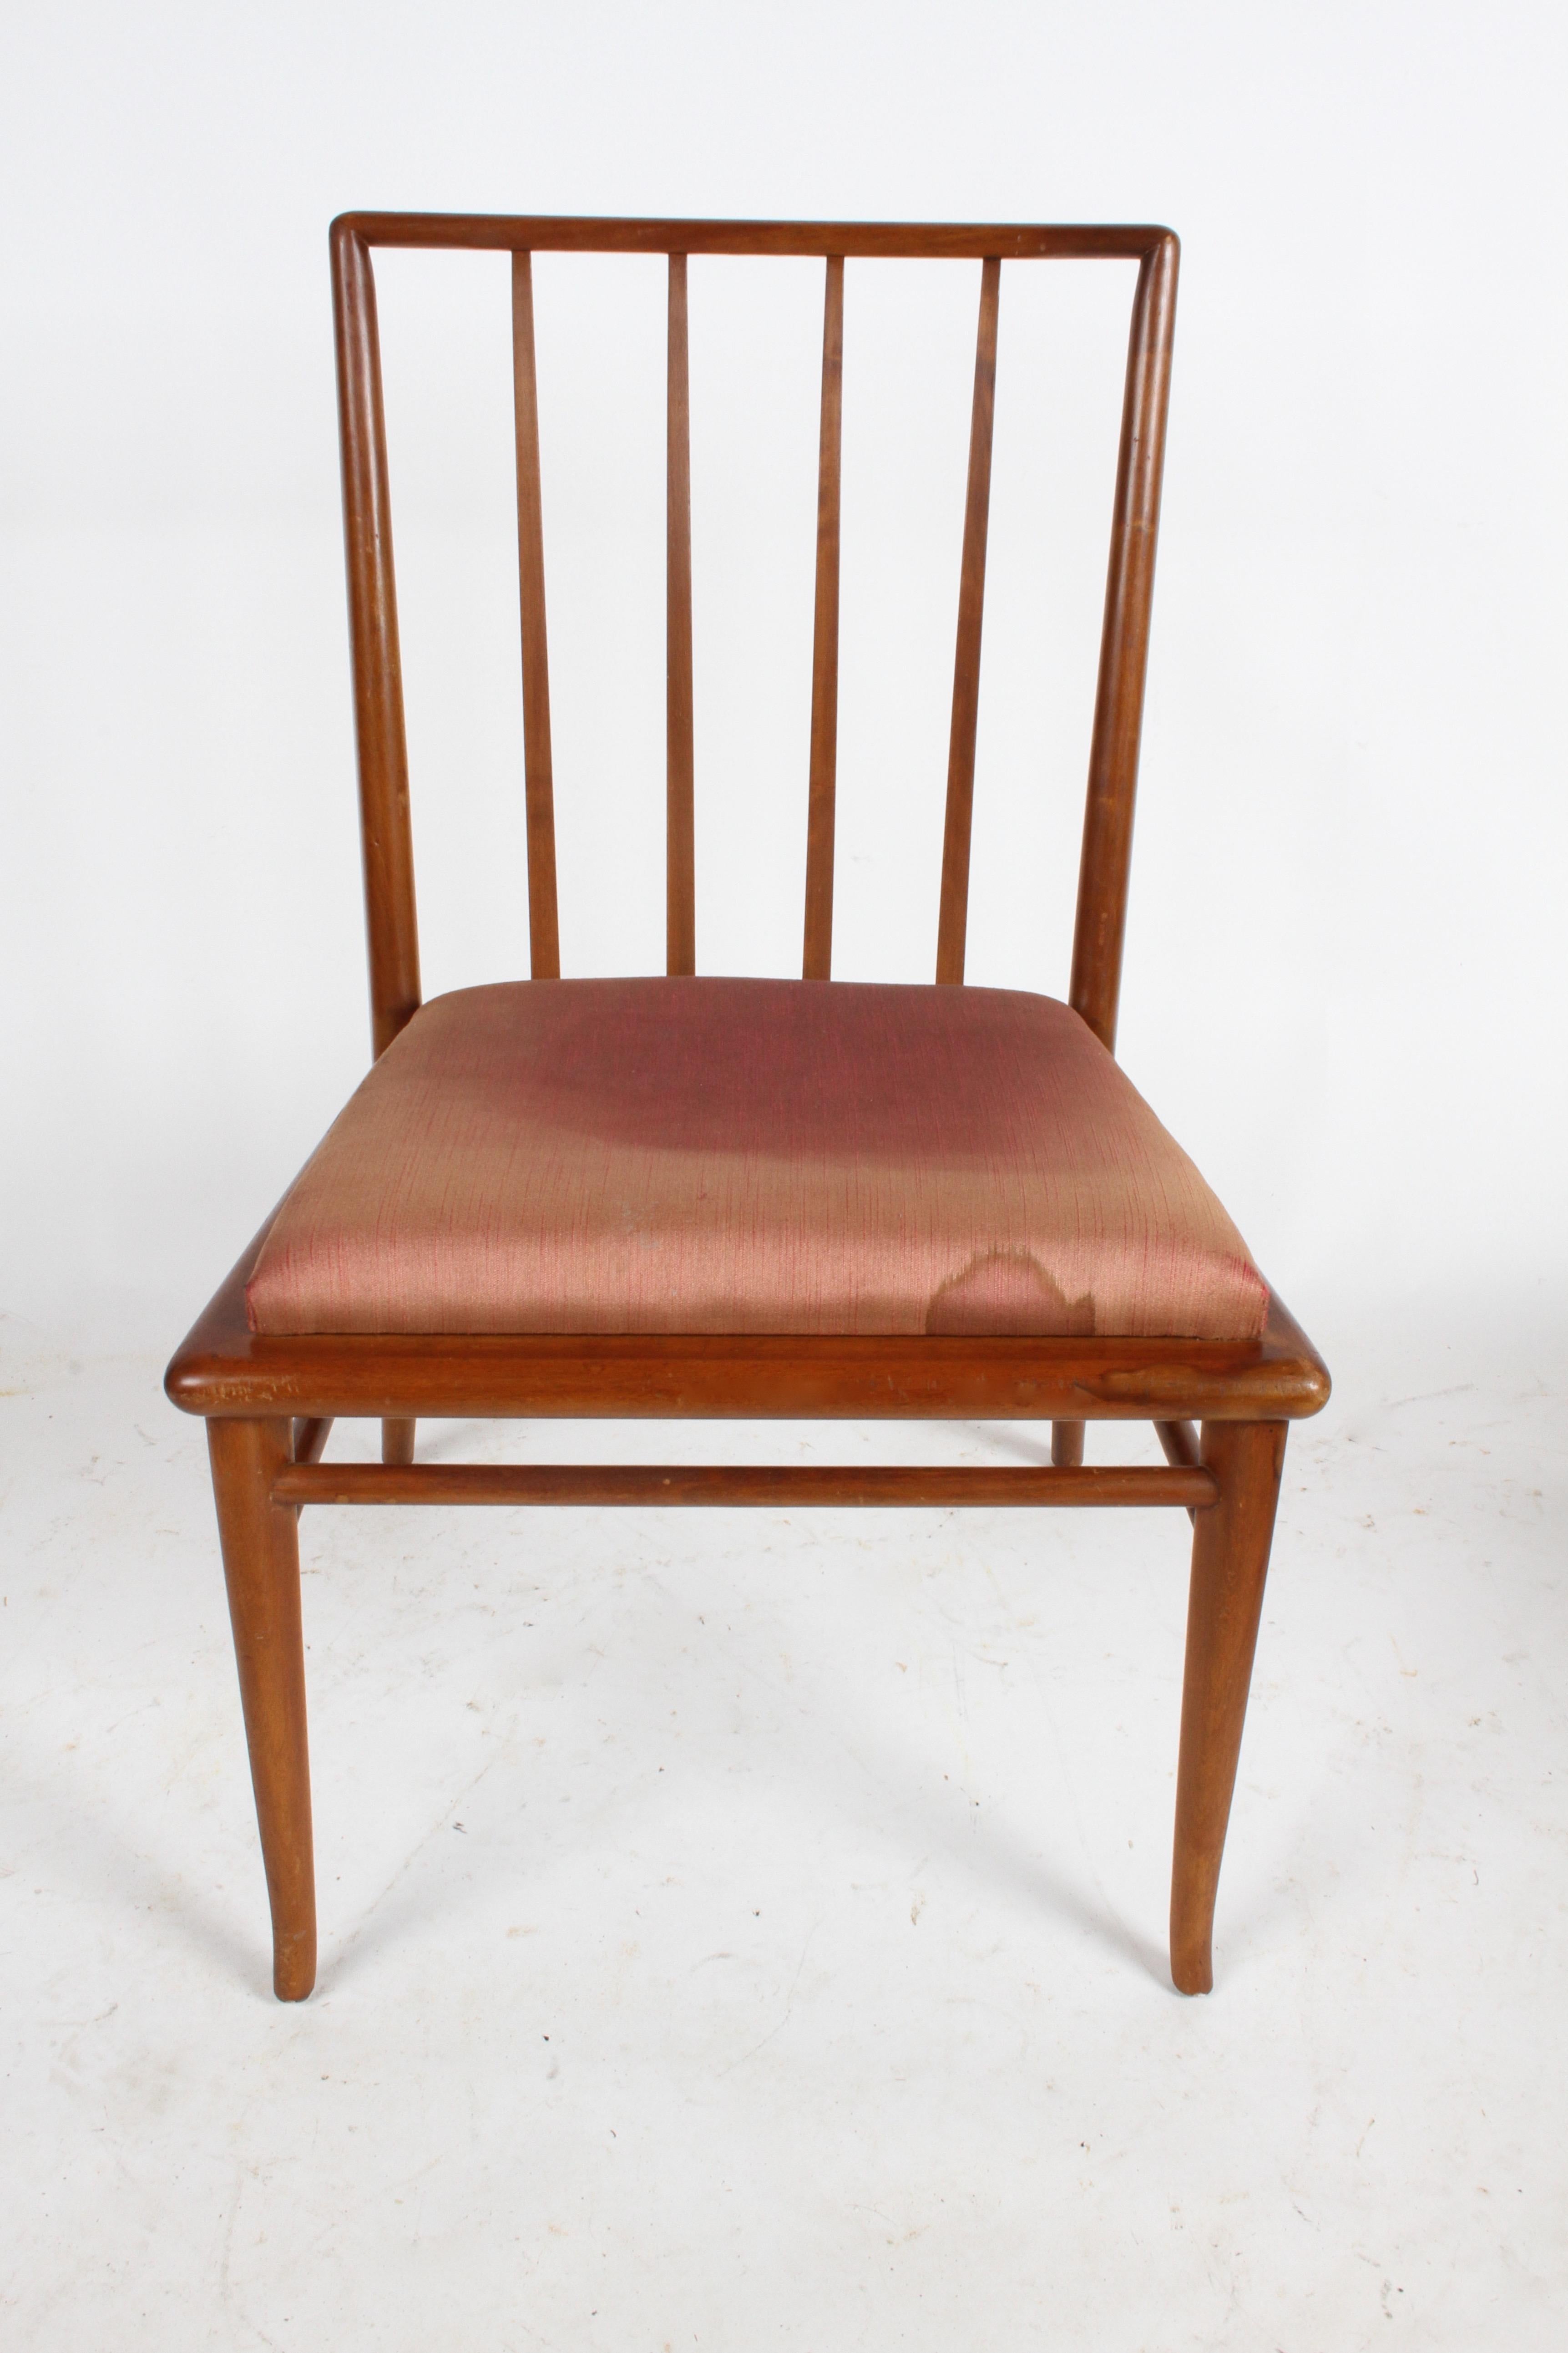 Listed is a single classic slat back dining chair by T.H. Robsjohn-Gibbings for Widdicomb. Shown in original finish, but includes refinishing in color shown or dark espresso, custom color options available. New foam and upholstery extra. Can be used